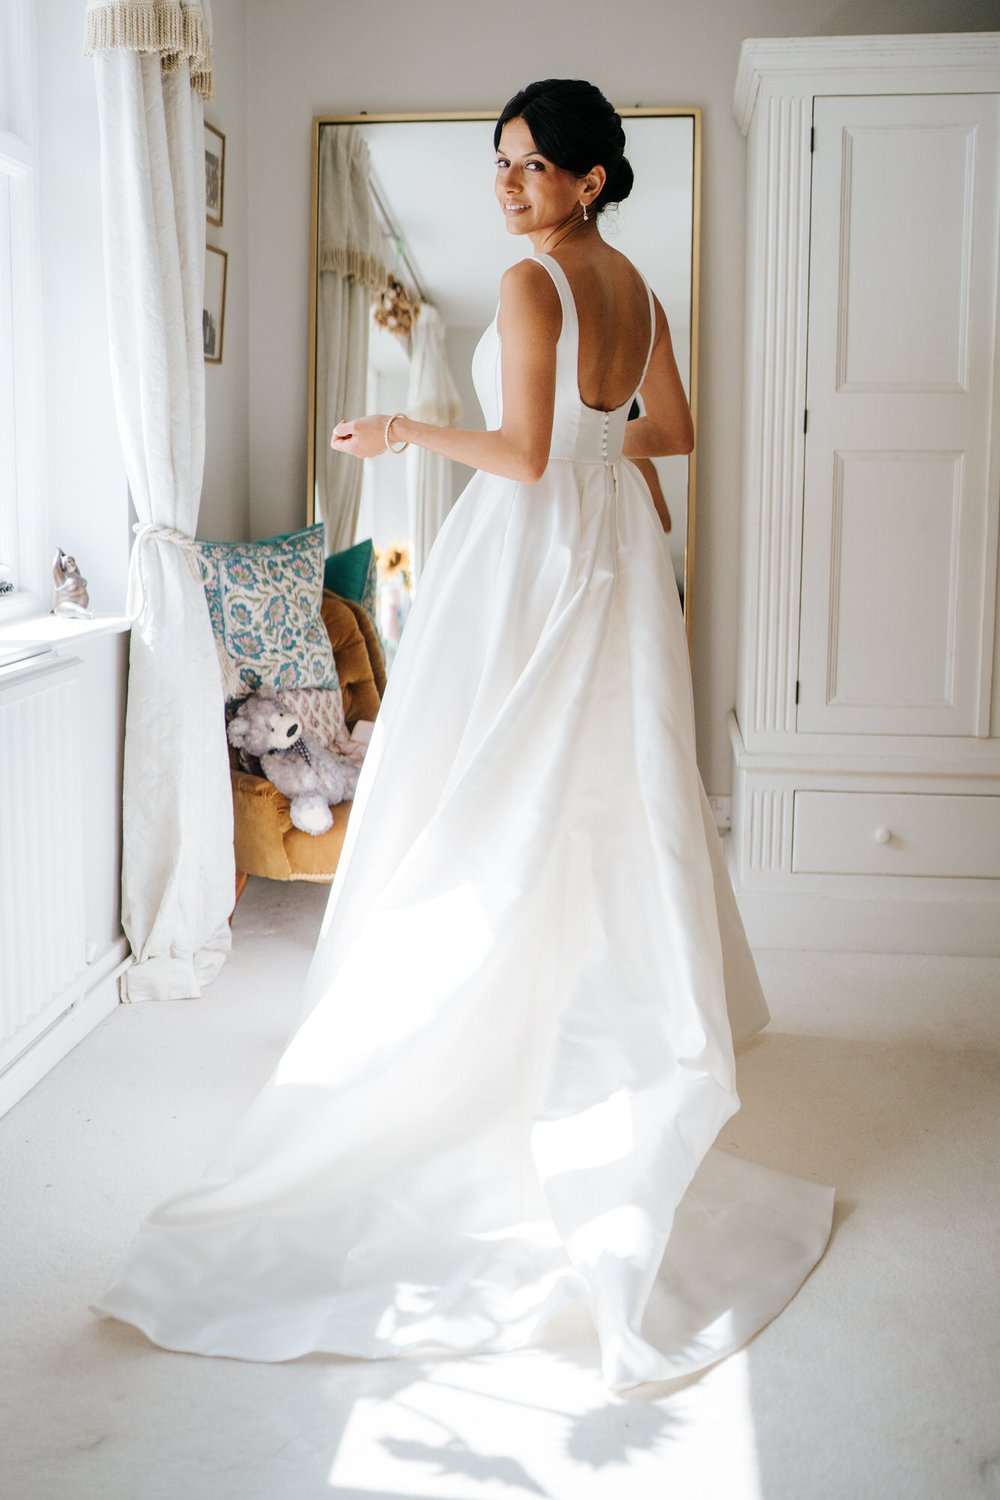 Bride, in her wedding dress, looks over her shoulder and back at camera in candid portrait